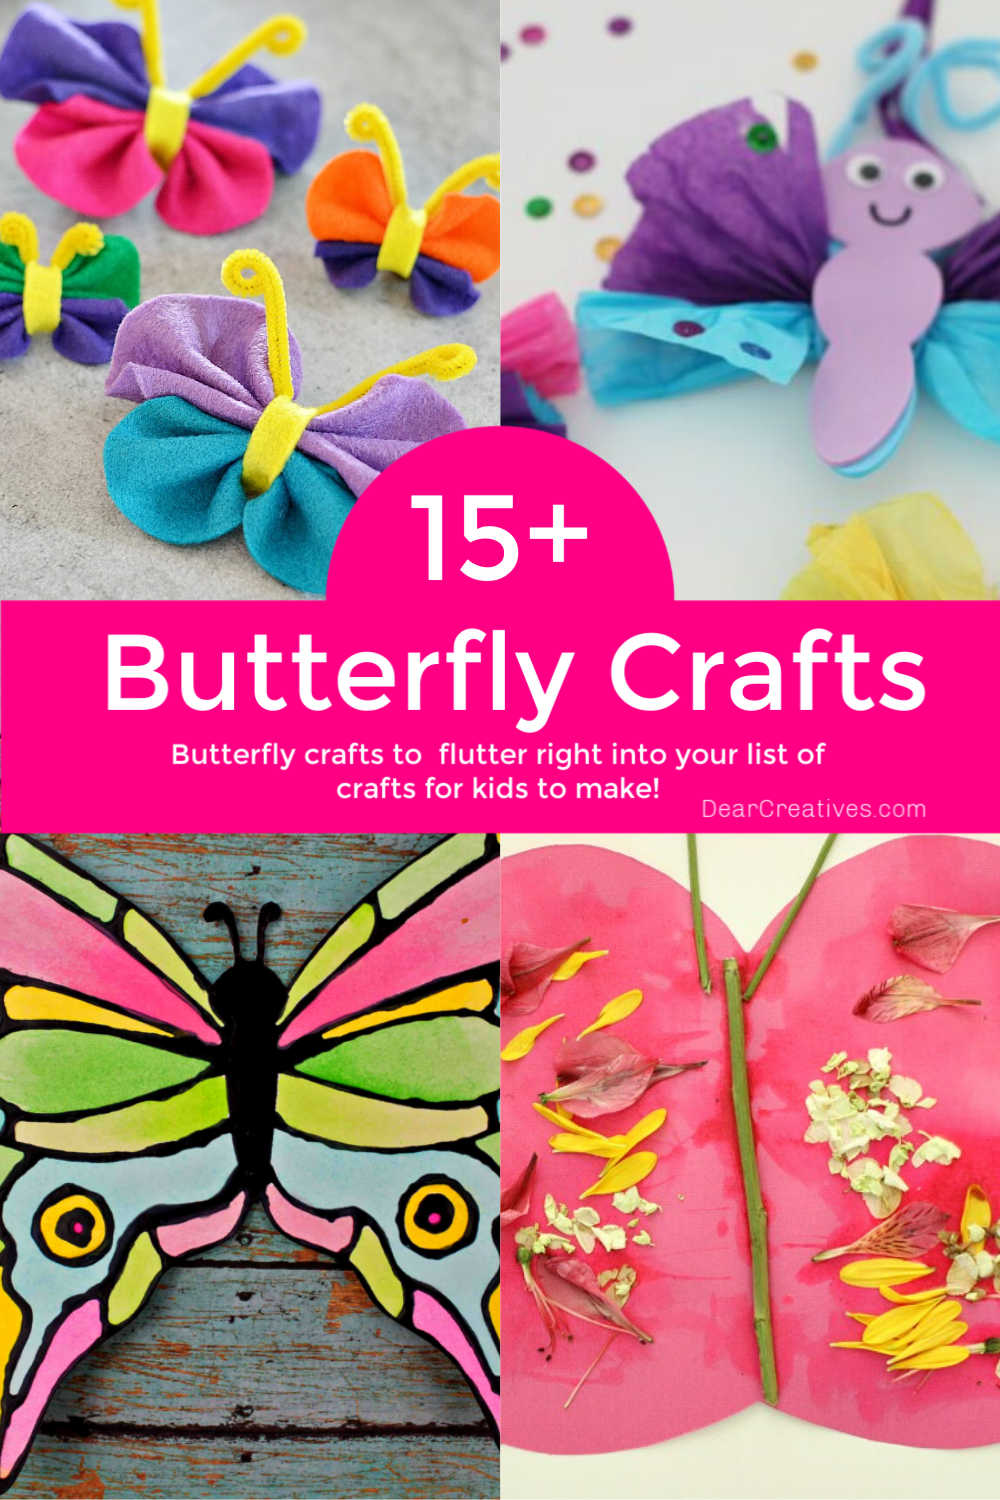 15+ Butterfly Crafts For Kids To Brighten Your Day! - Dear Creatives